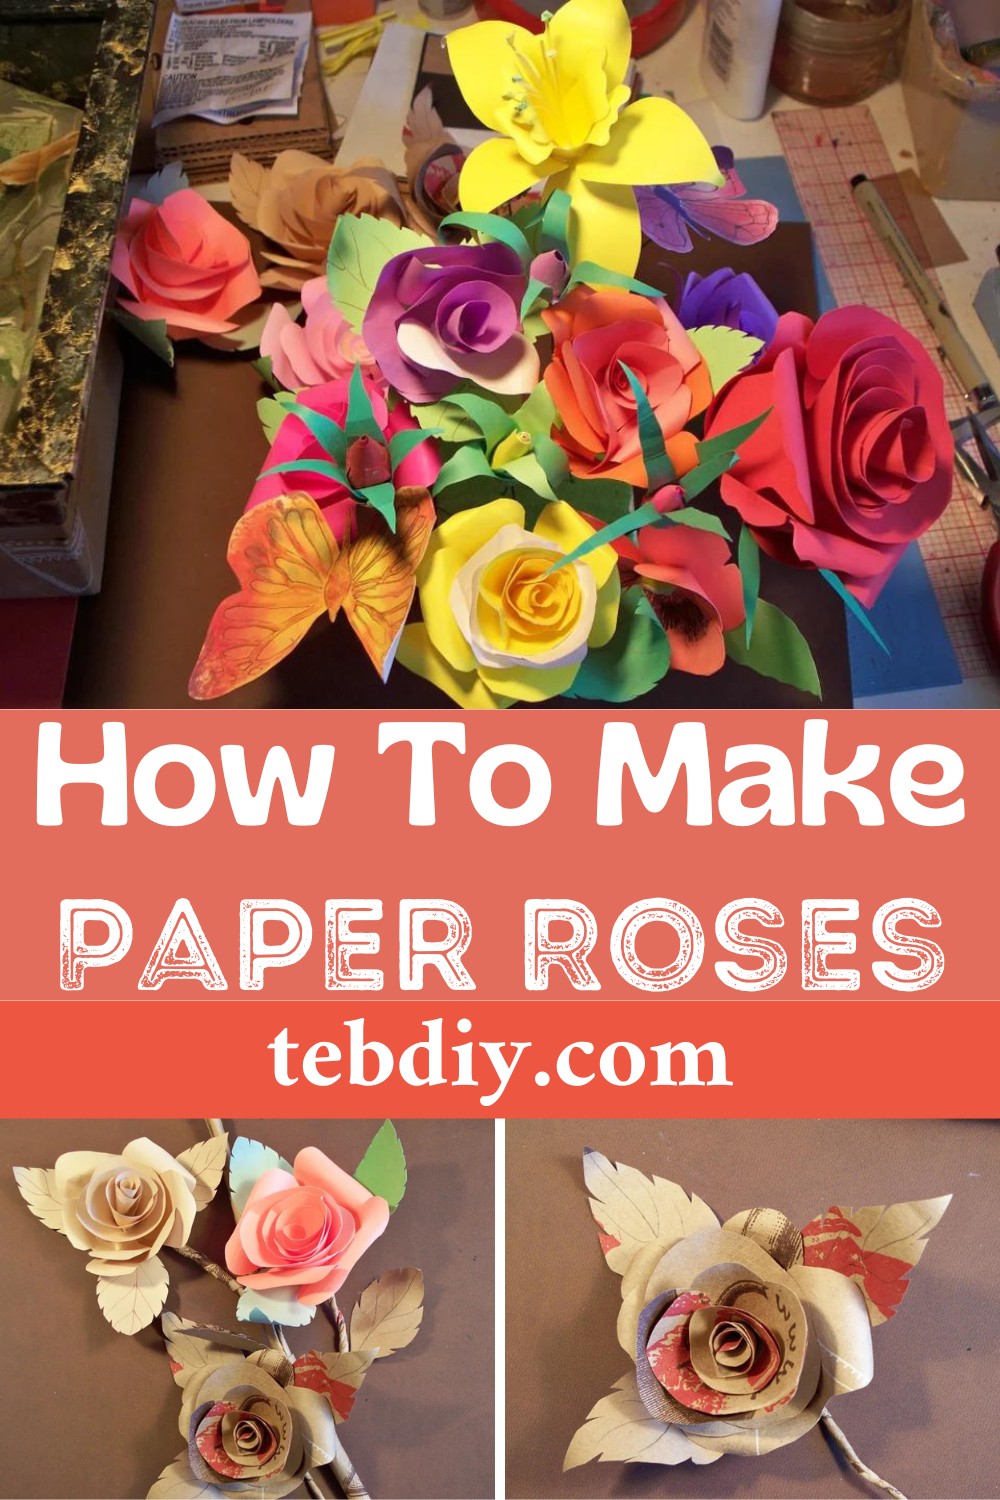 How to Paper Roses